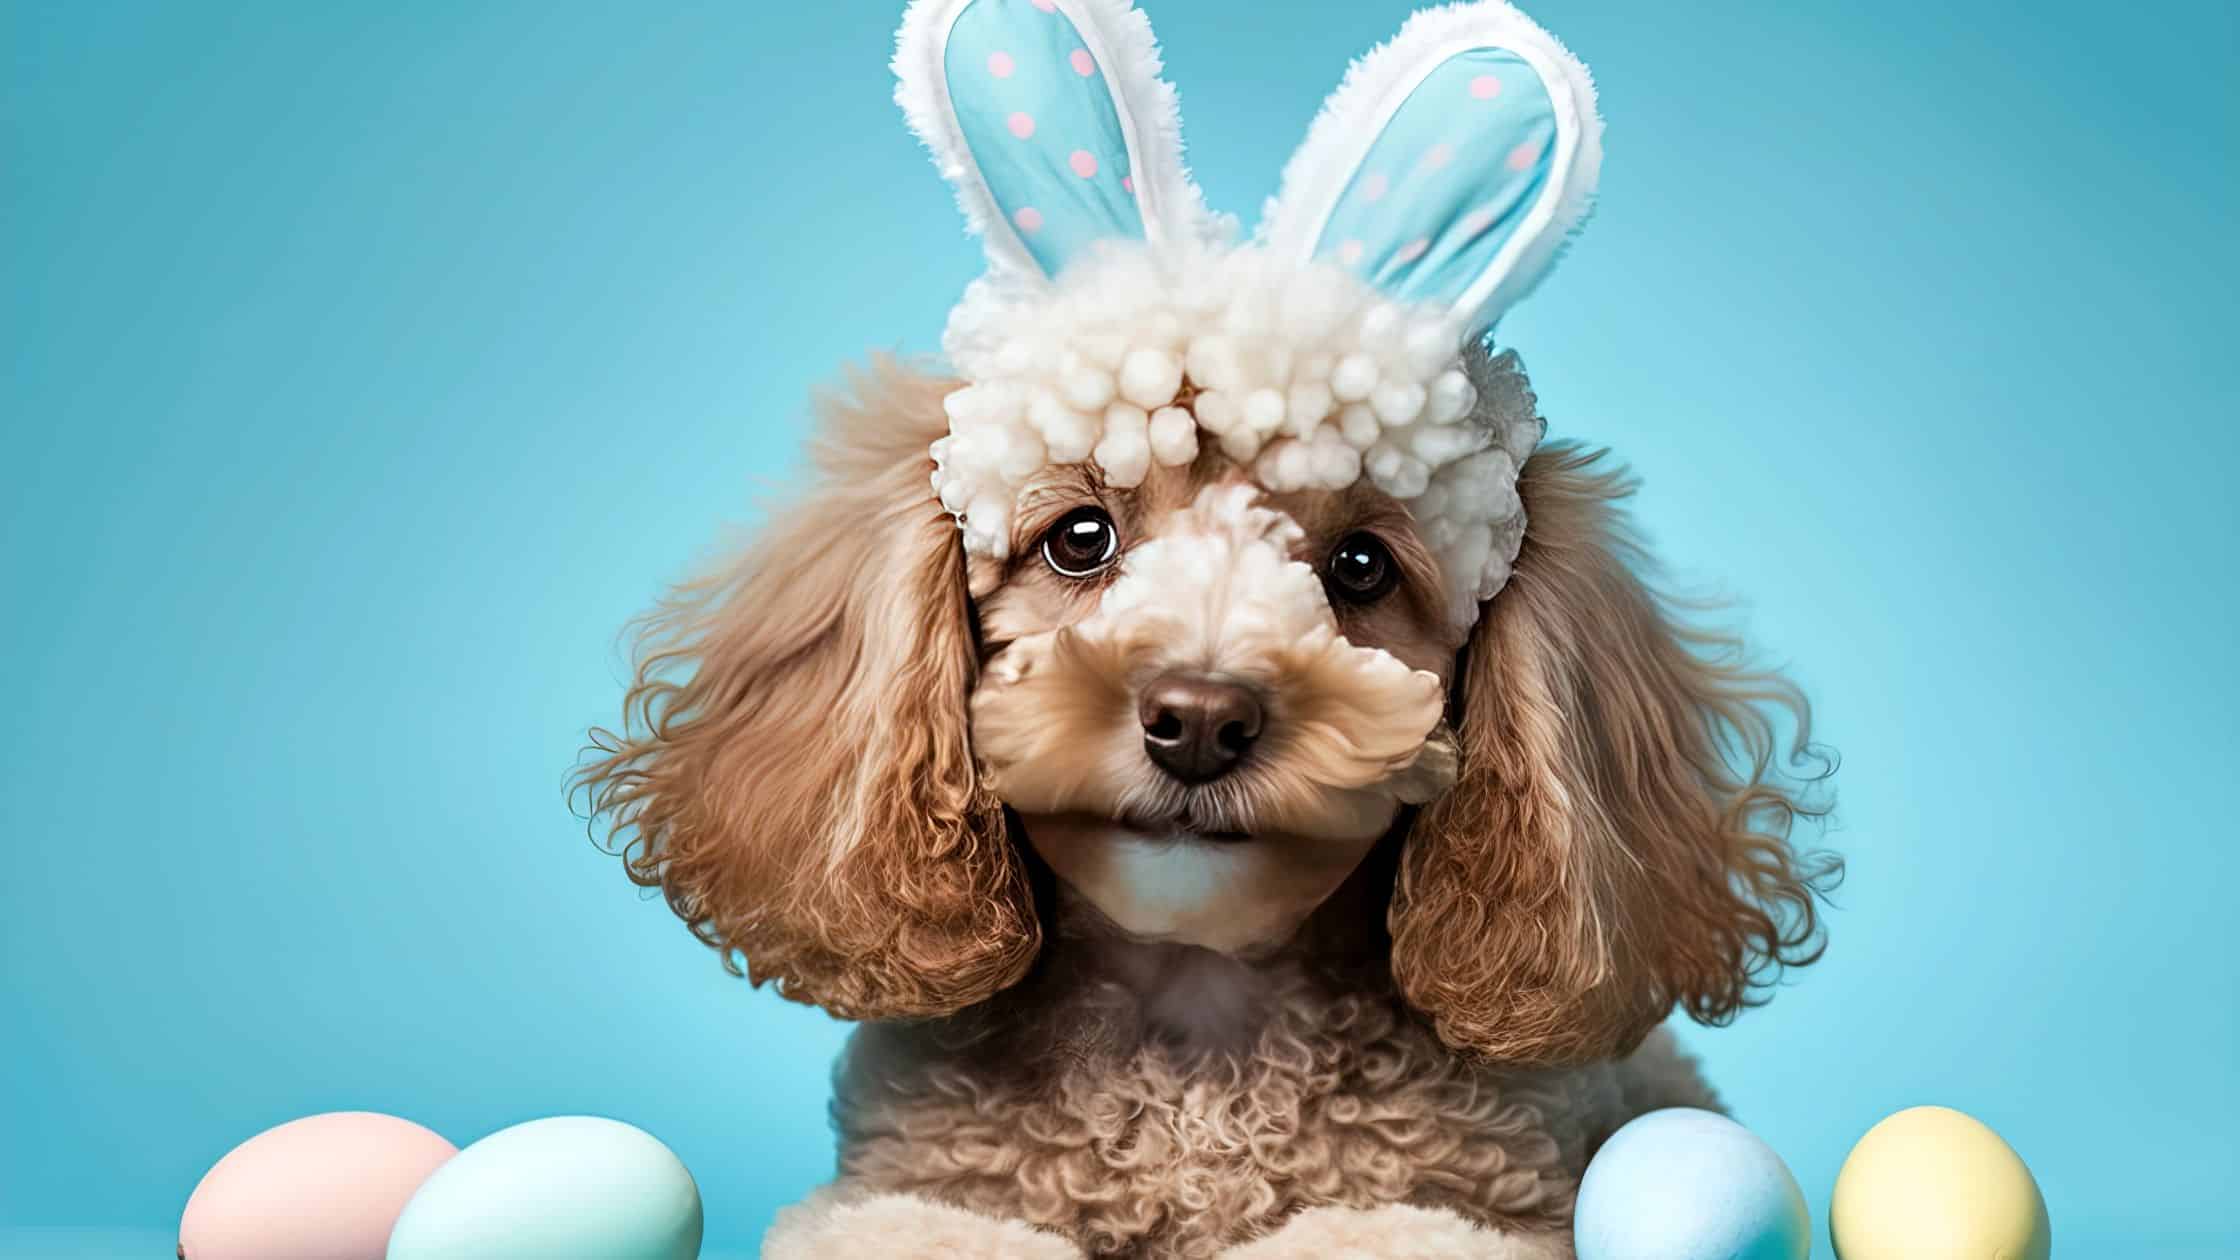 Celebrate Easter with a Gift for Your Dog